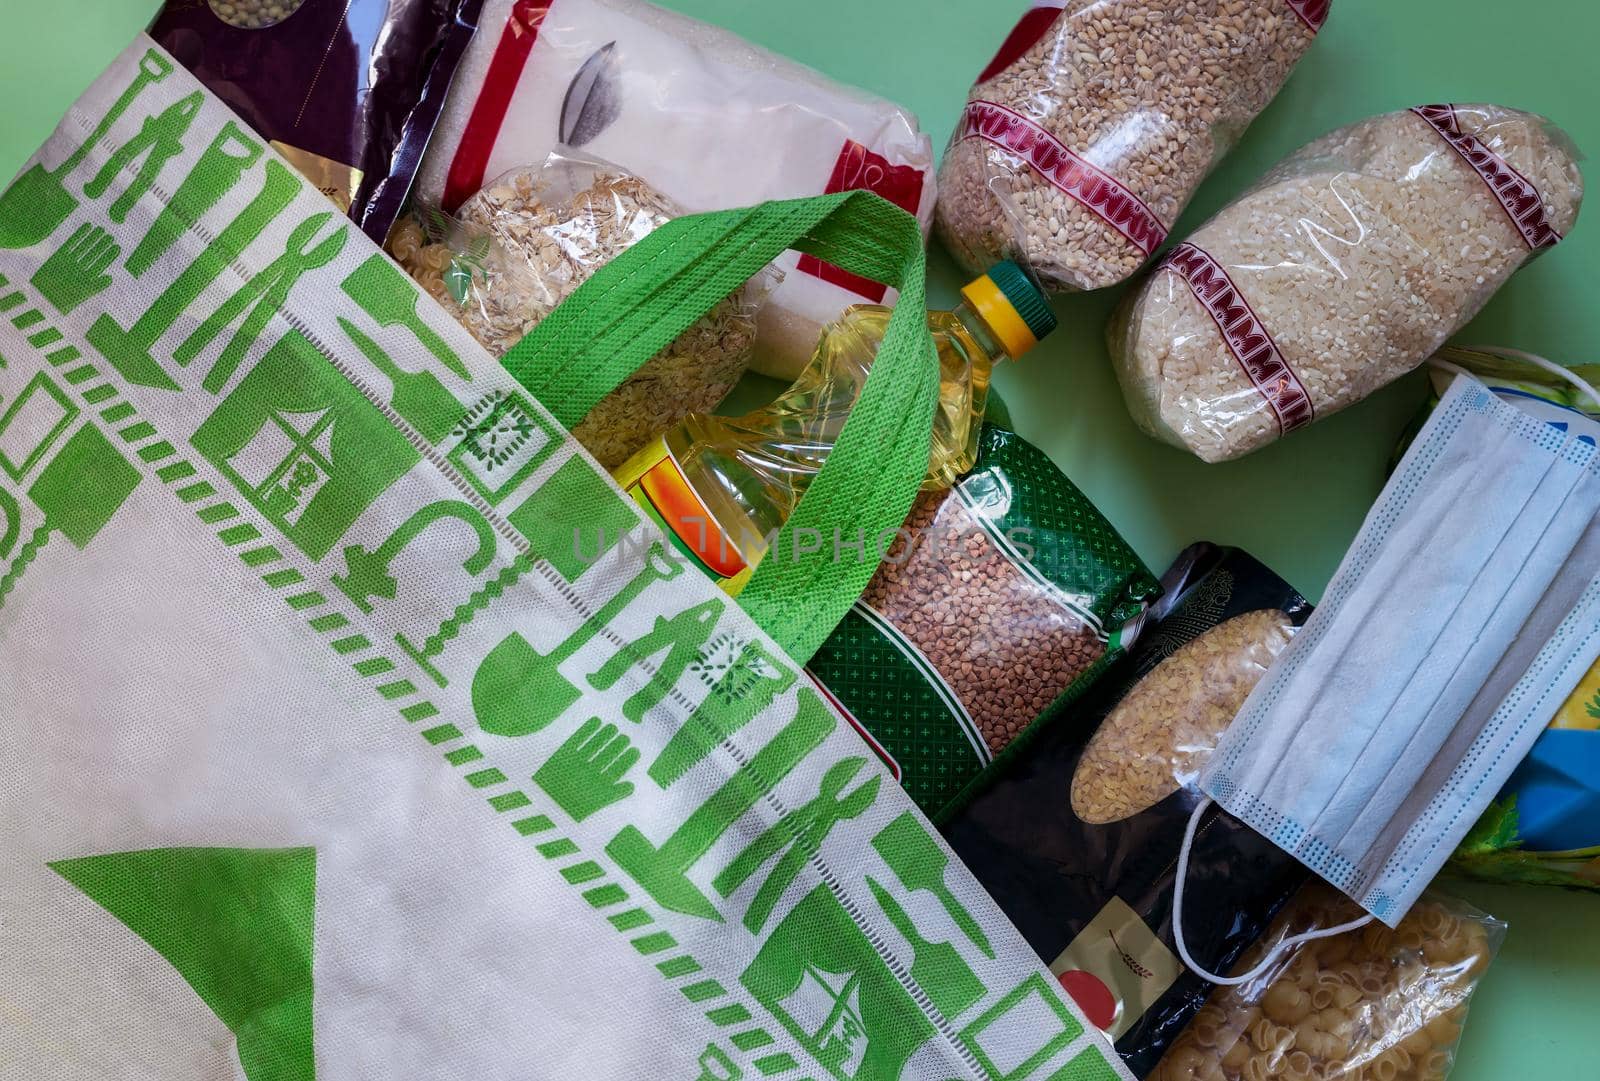 Crisis food supply for the period of quarantine isolation during the coronavirus pandemic. A set of products in a paper bag: rice, pasta, oatmeal, sugar, cereals. Food delivery. Top view, copy space